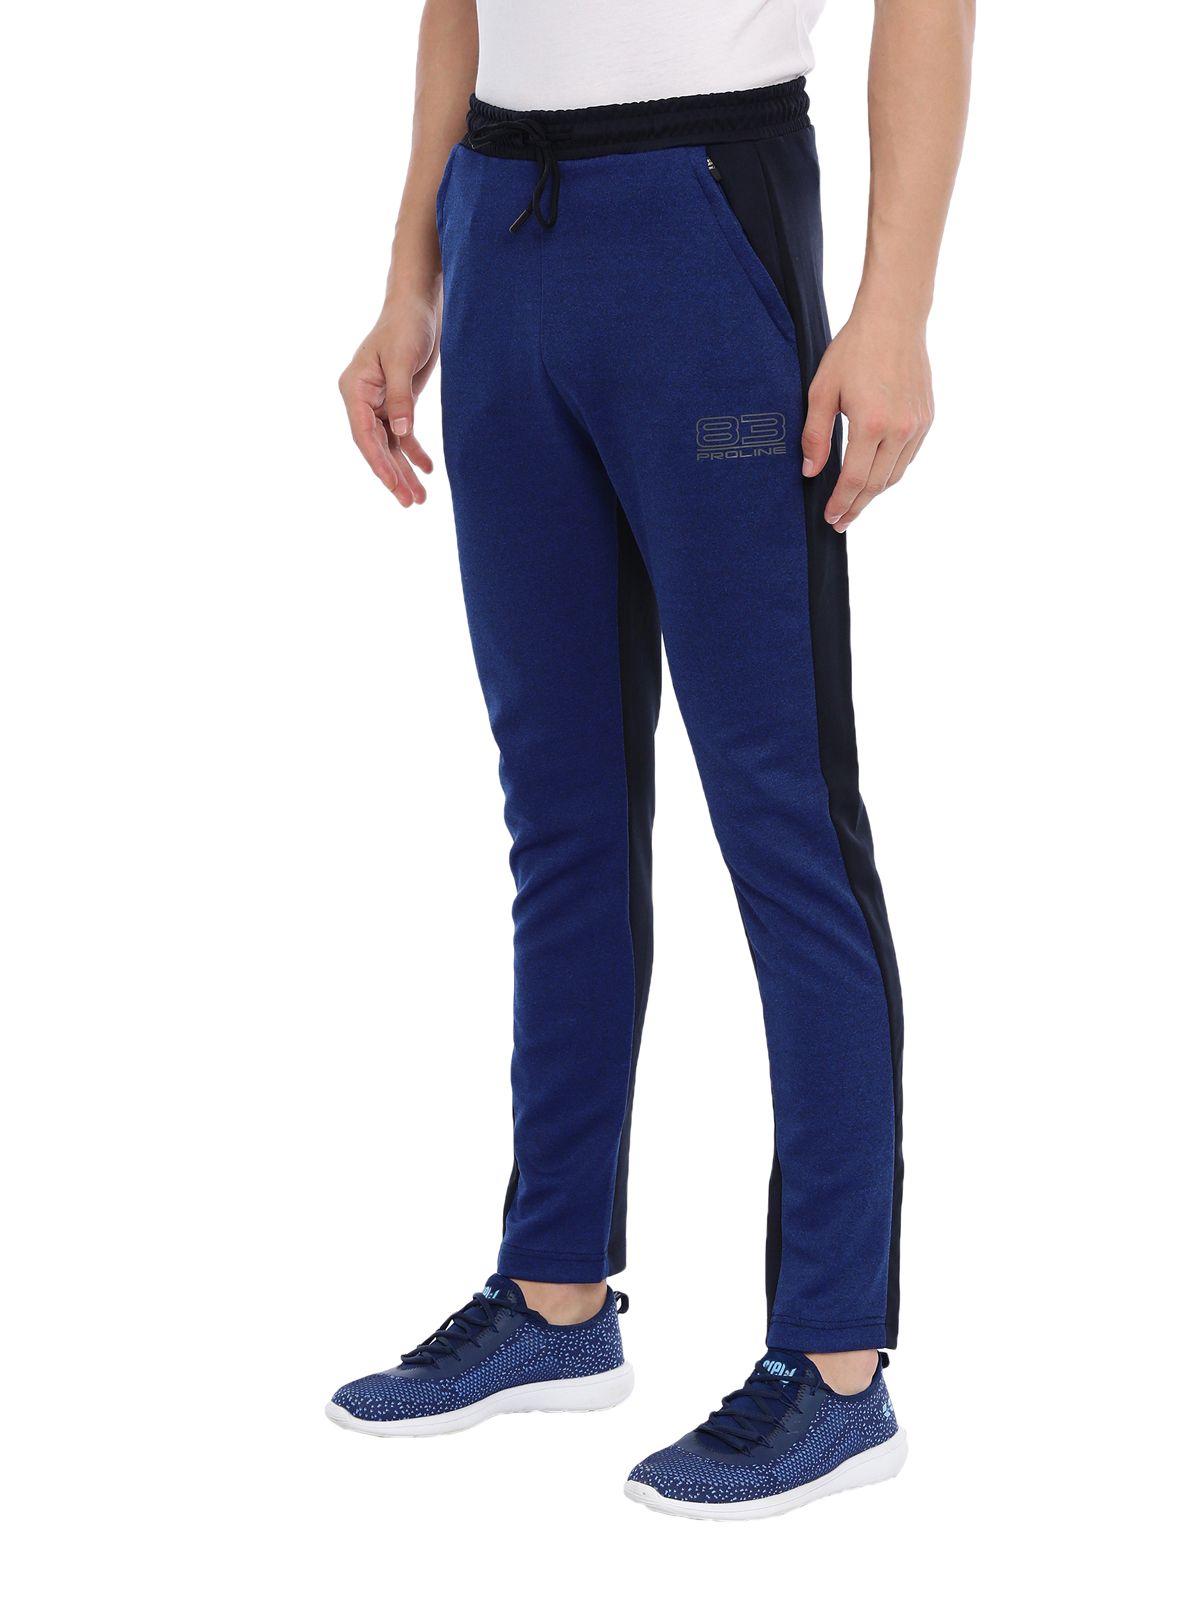 Jinxer Regular Fit Cotton Lowers For Men/ Boys (navy Blue Color)